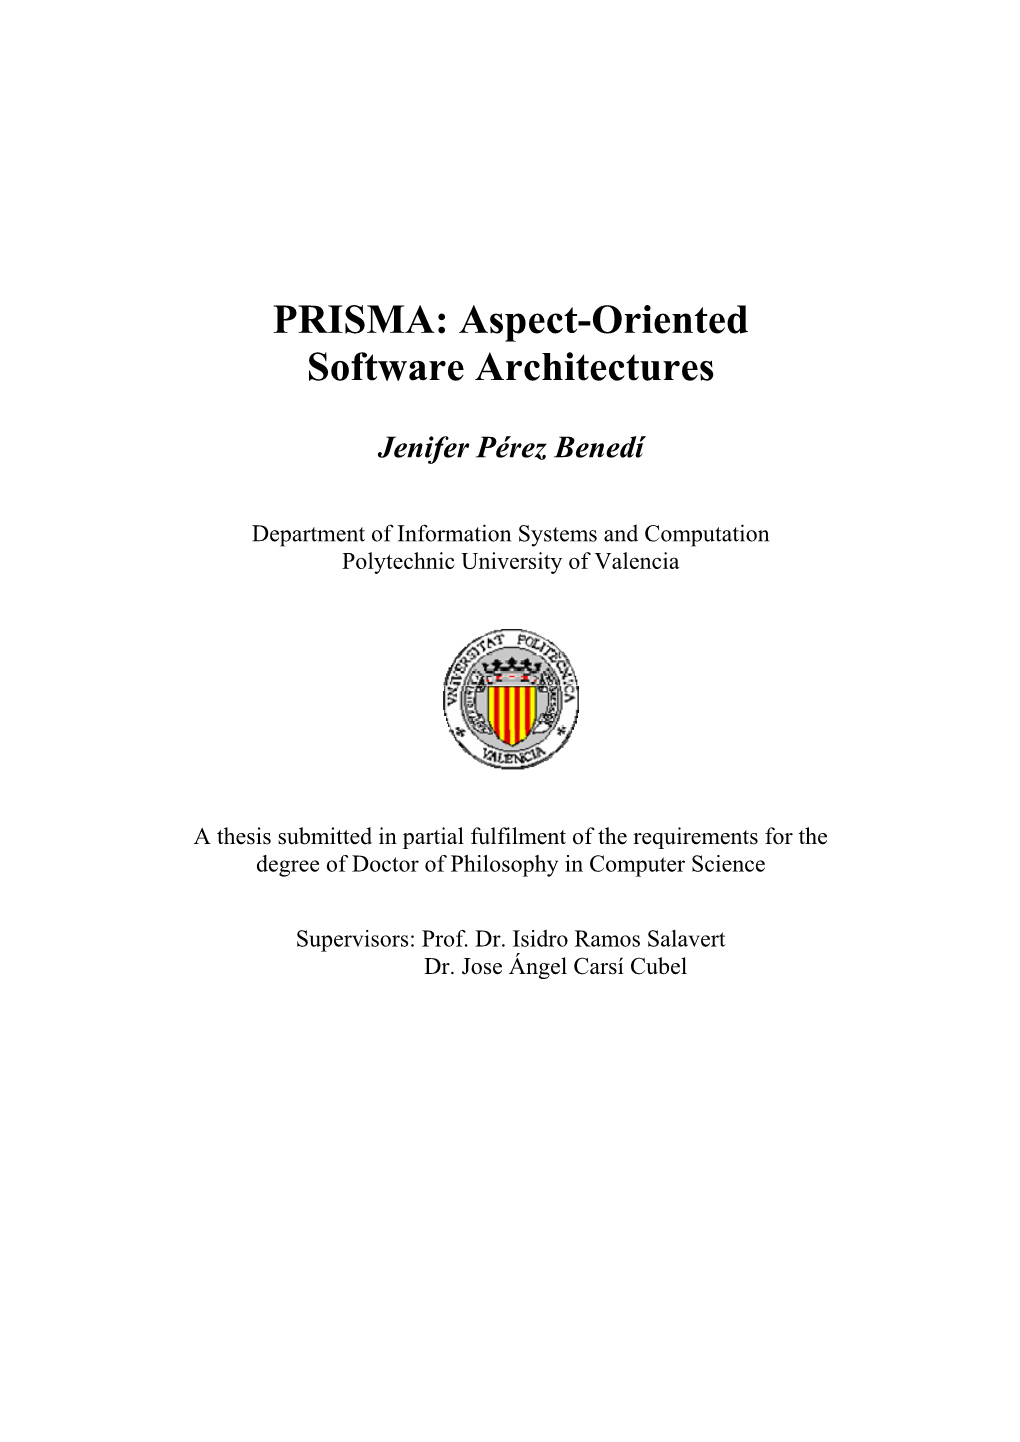 Aspect-Oriented Software Architectures